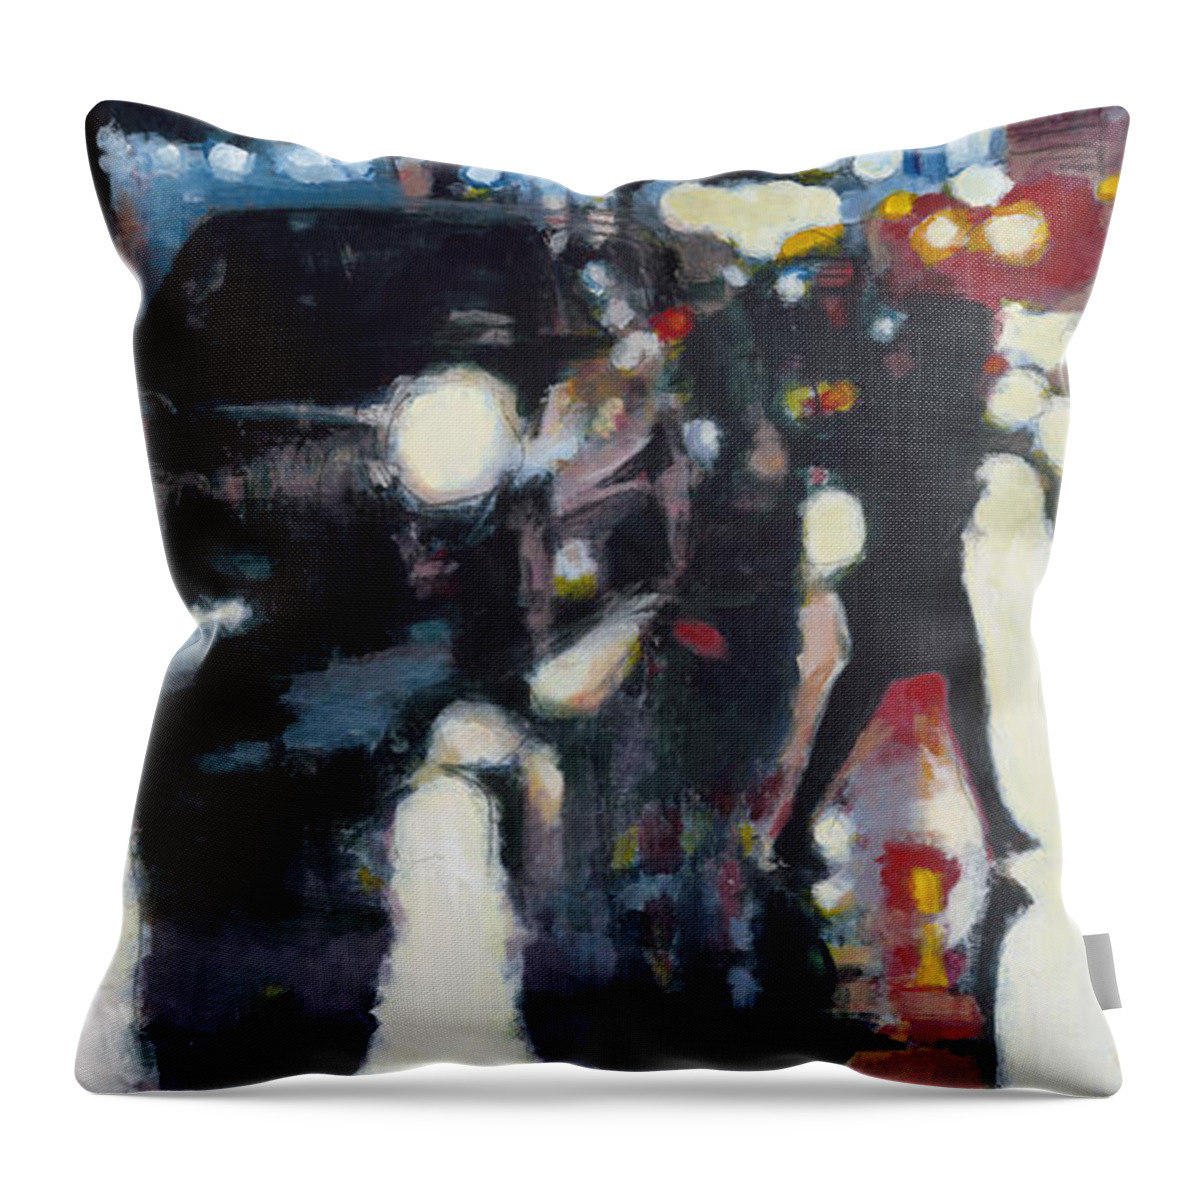 Urban Landscape Throw Pillow featuring the painting Crossed by Robert Reeves